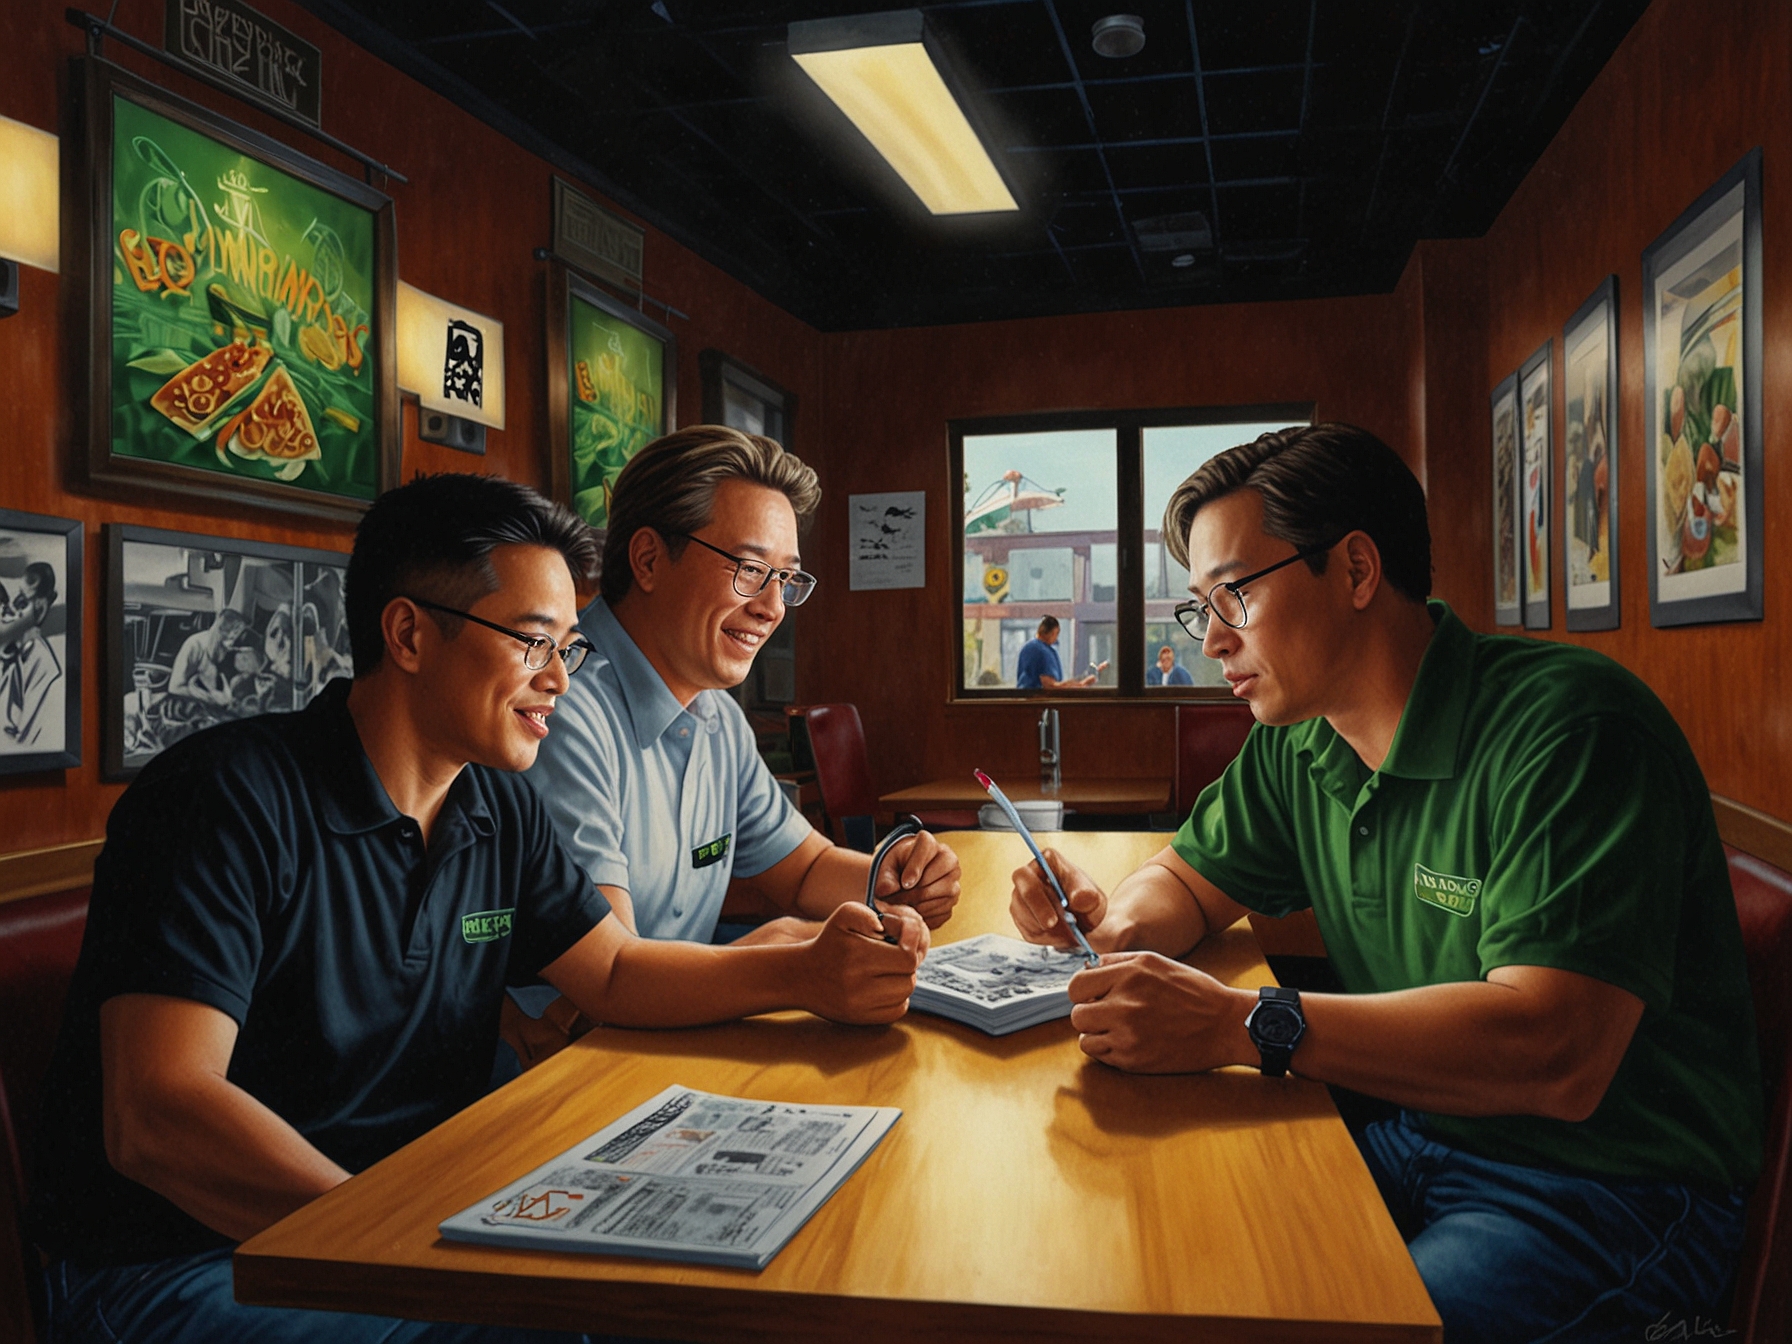 An illustration depicting Jensen Huang, Chris Malachowsky, and Curtis Priem conceptualizing Nvidia at a Denny's restaurant in 1993, symbolizing the company's innovative beginnings.